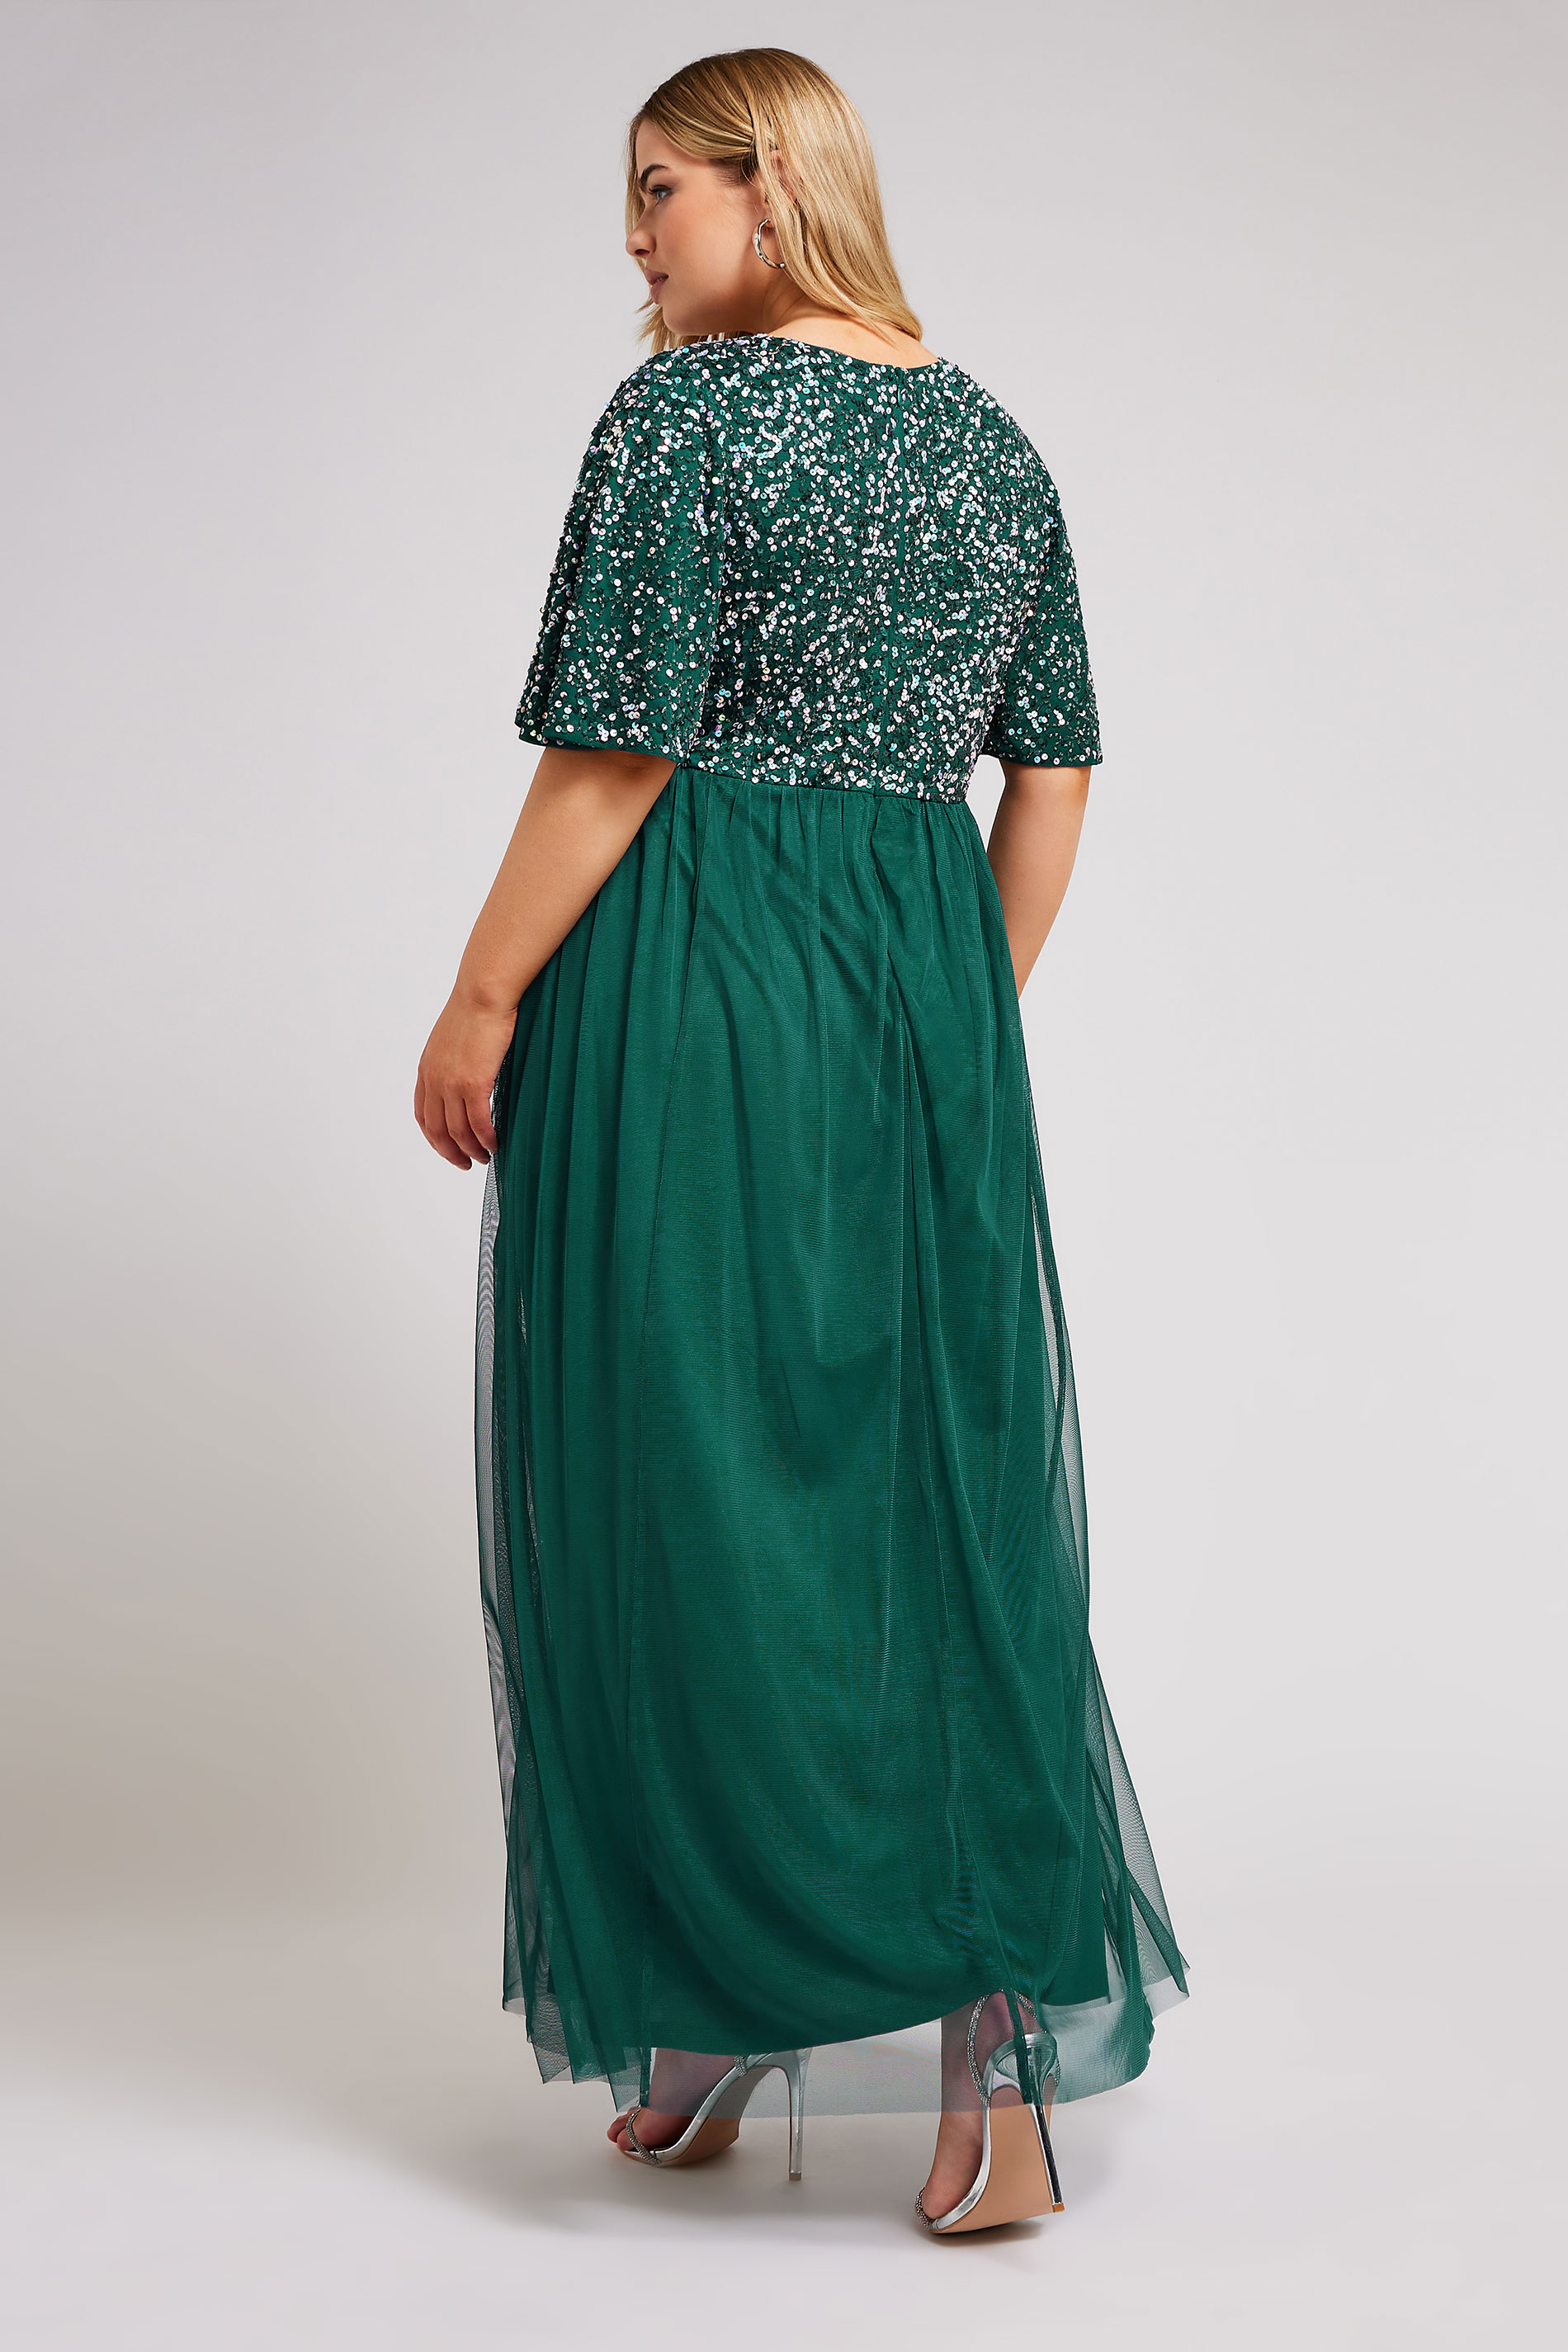 LUXE Plus Size Forest Green Sequin Hand Embellished Maxi Dress | Yours Clothing 3